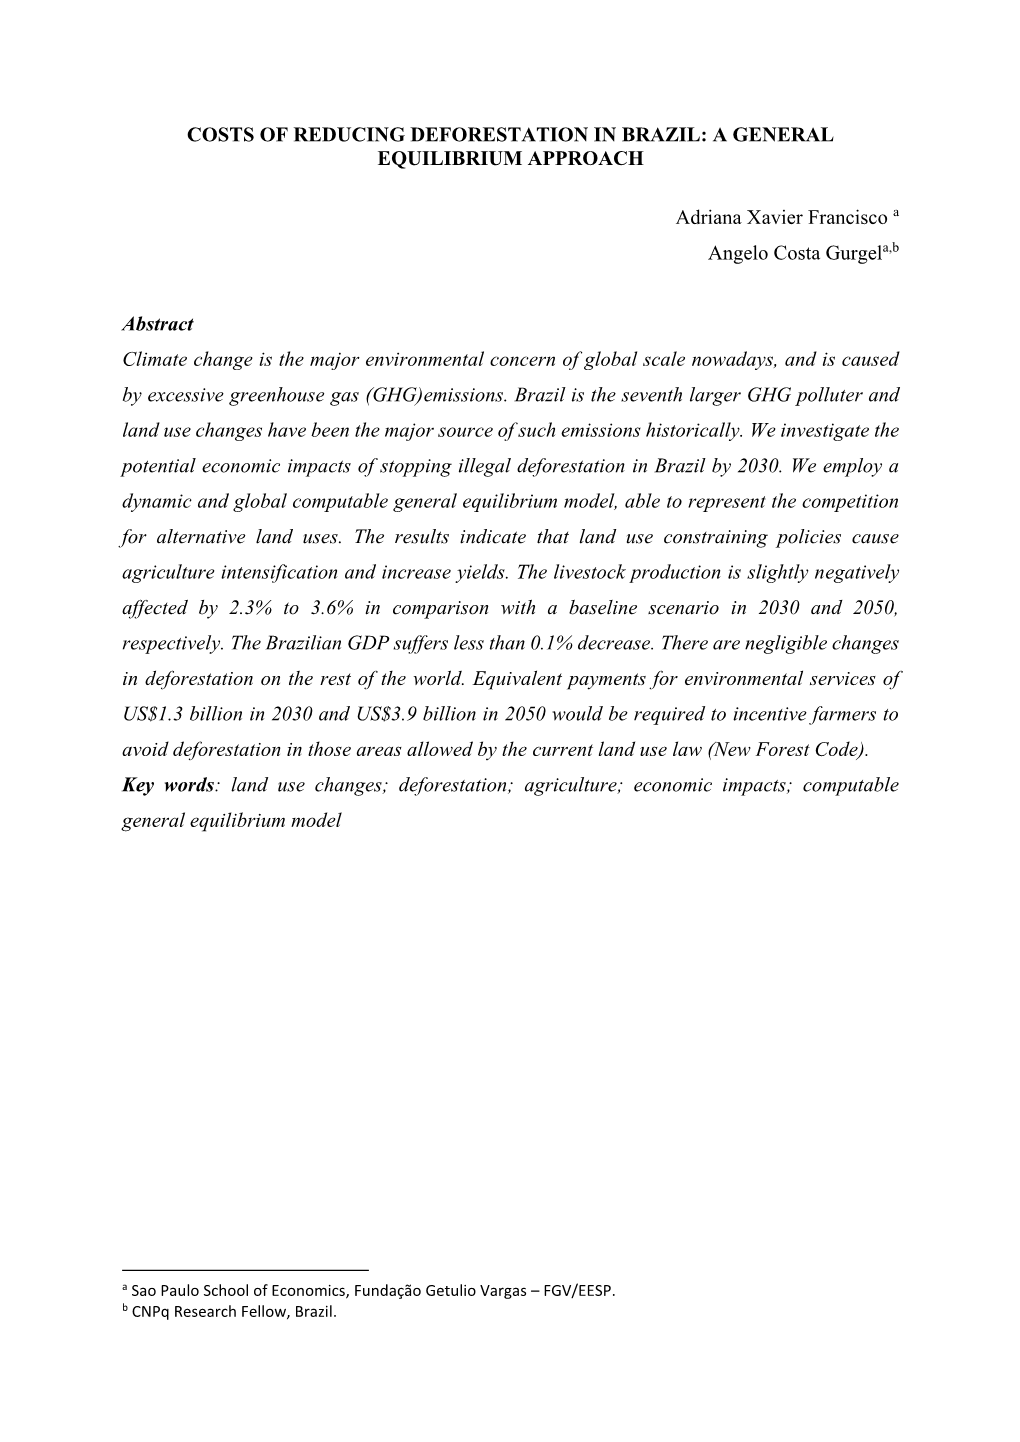 Costs of Reducing Deforestation in Brazil: a General Equilibrium Approach